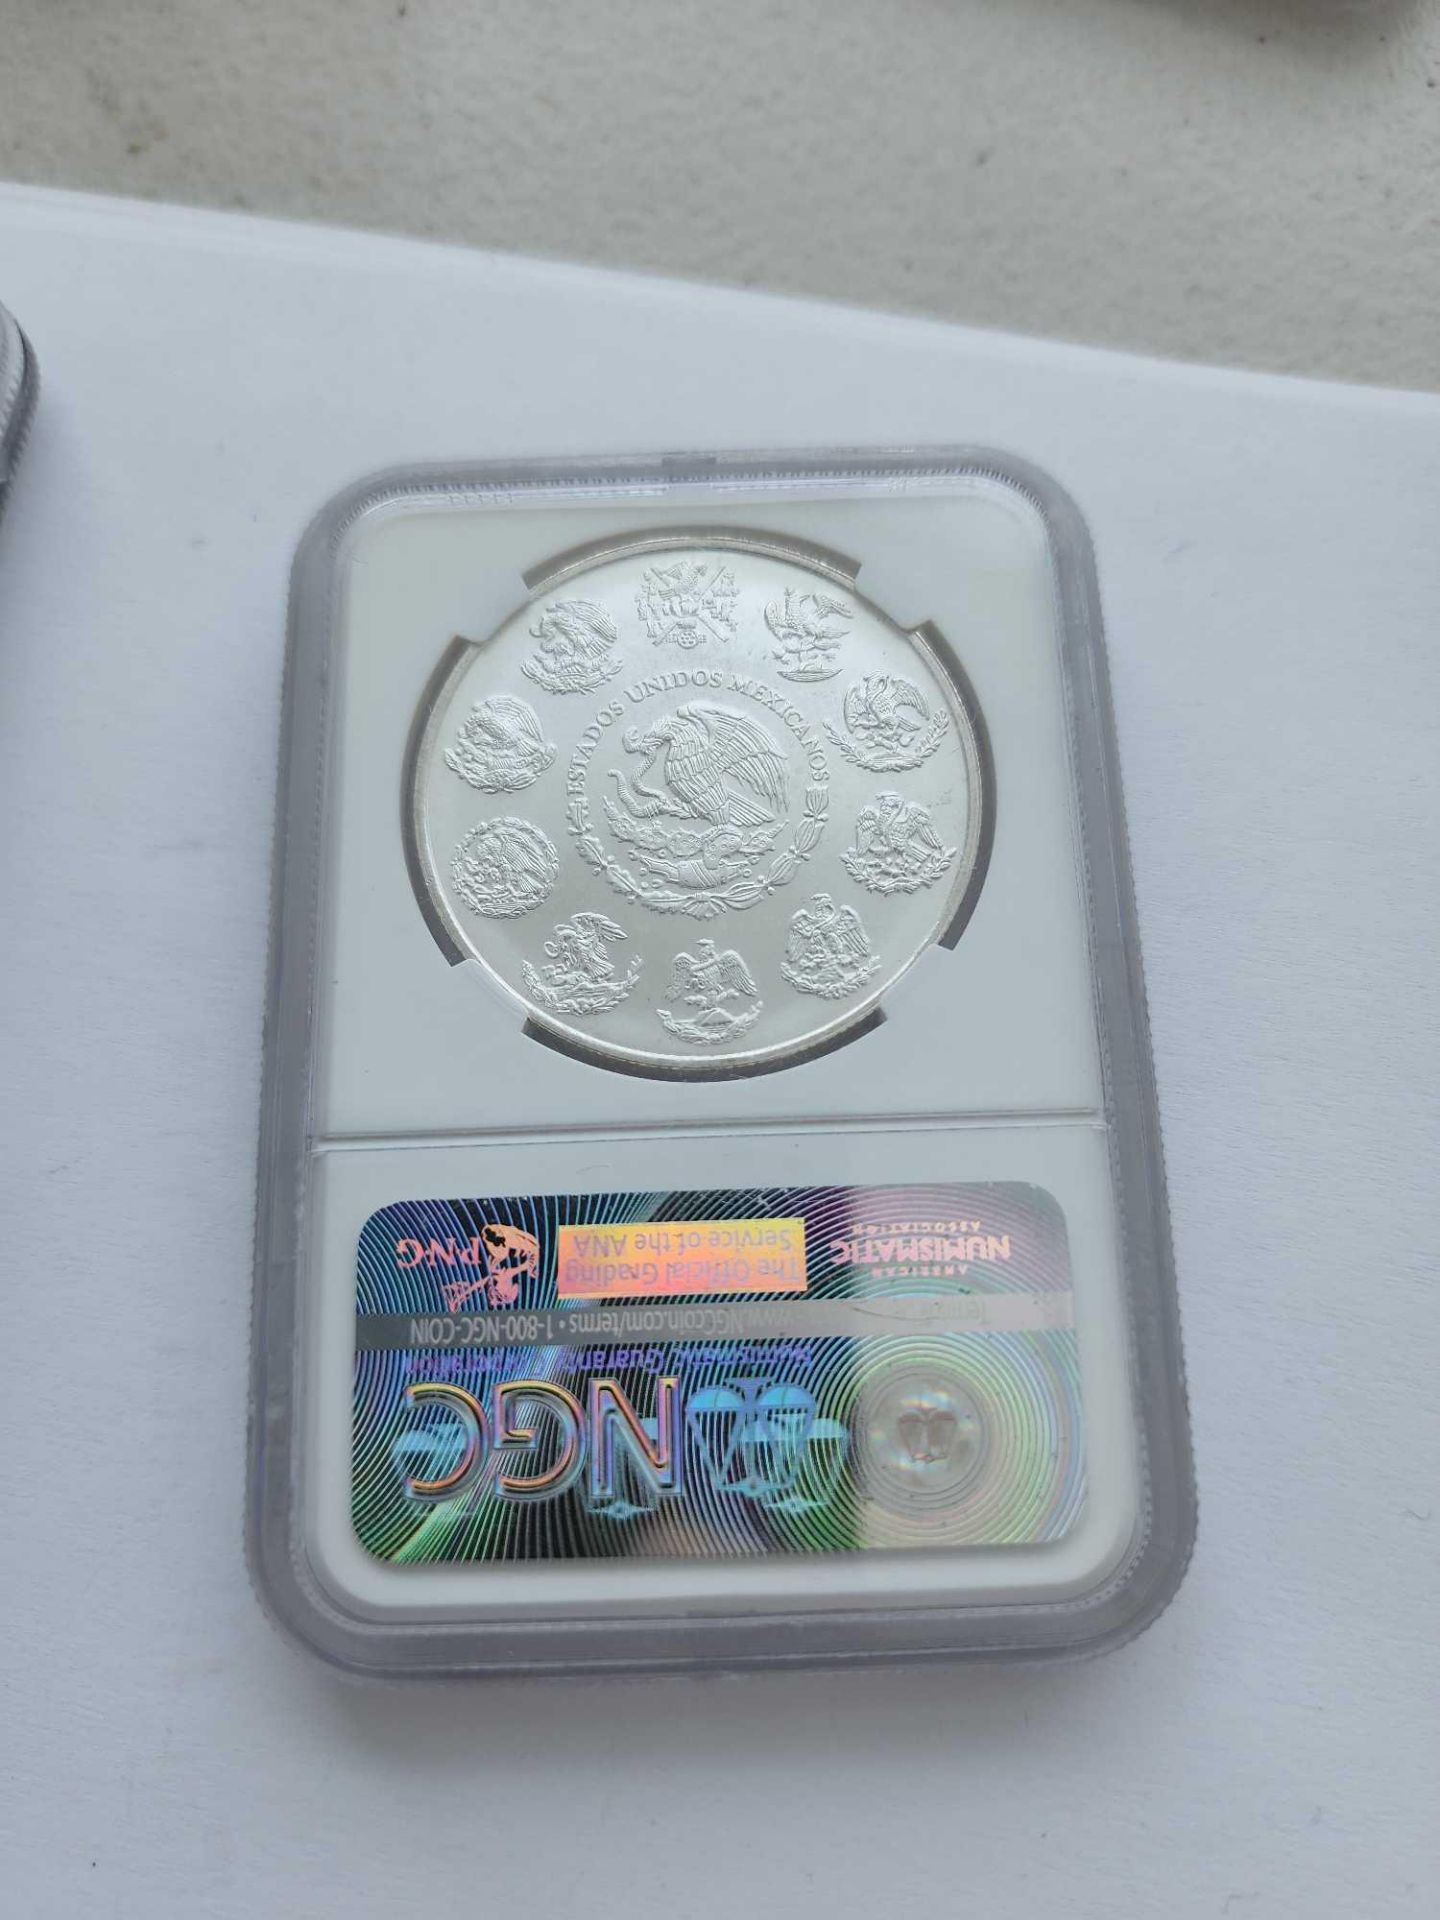 2000 Mexico 1 onza silver graded coin - Image 4 of 4